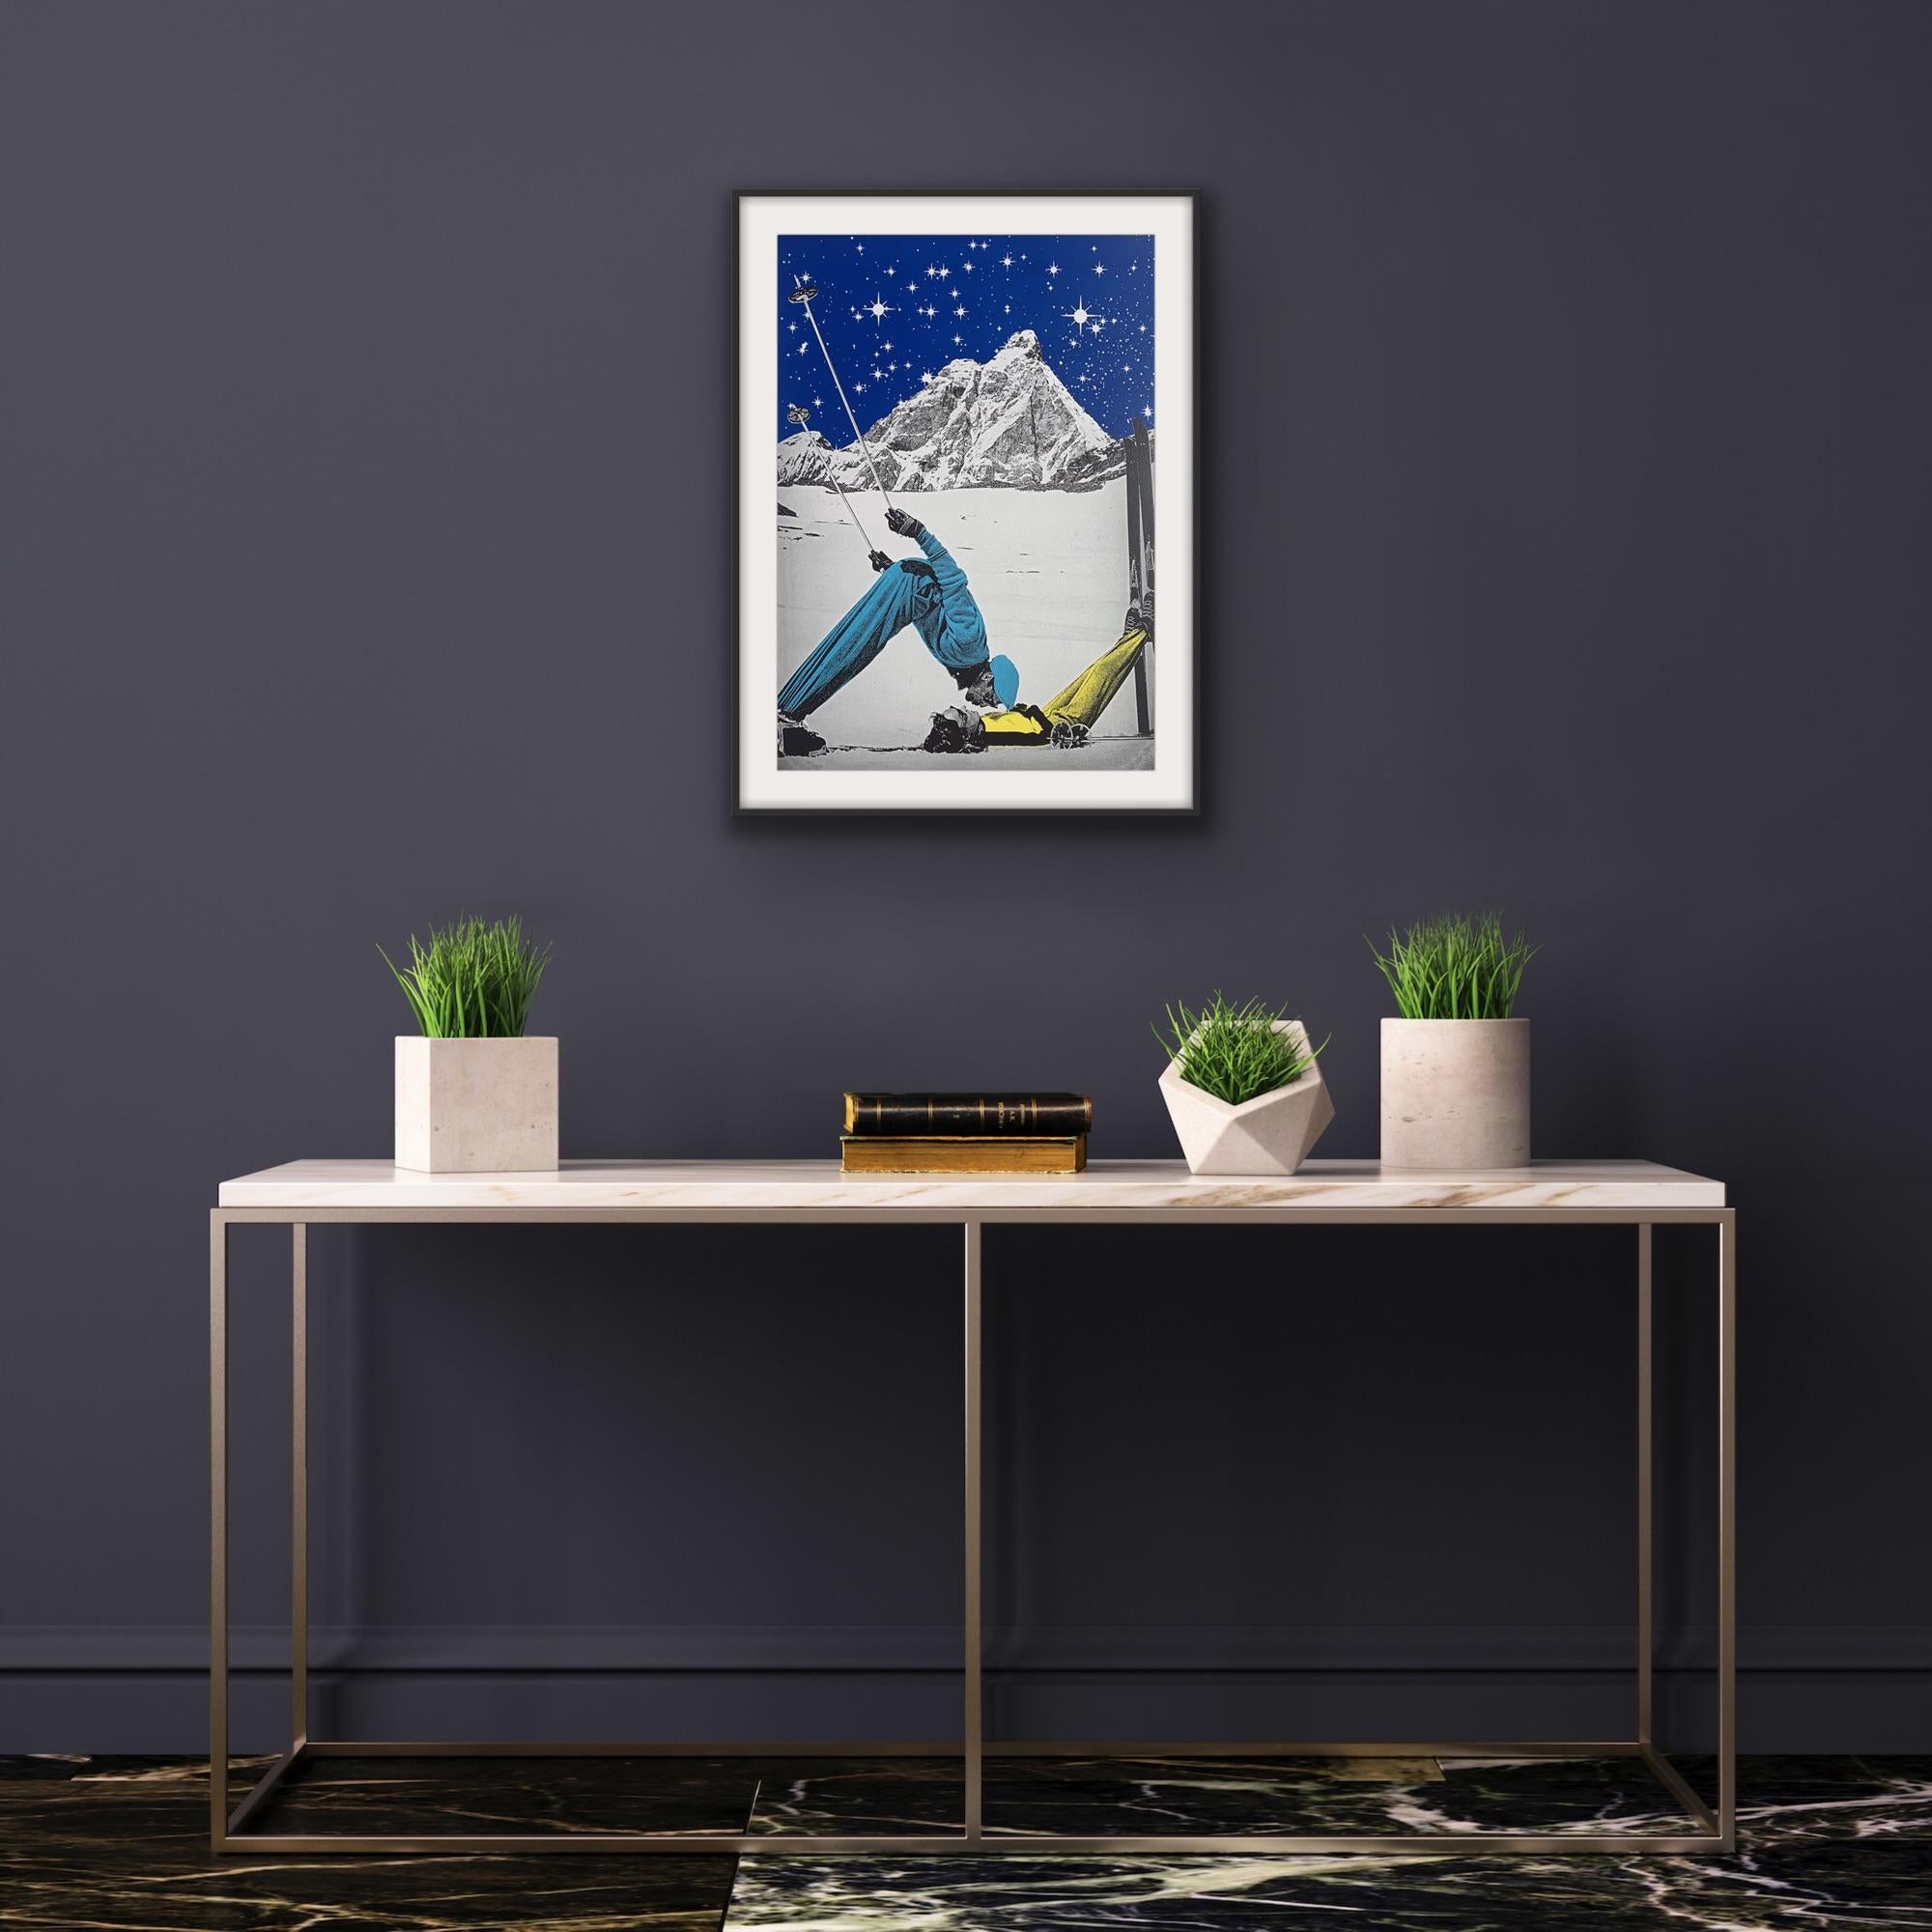 Ski Paradise, Anne Storno, Limited Edition print, Sport art, Skiiing art - Gray Landscape Print by Anne Storno 